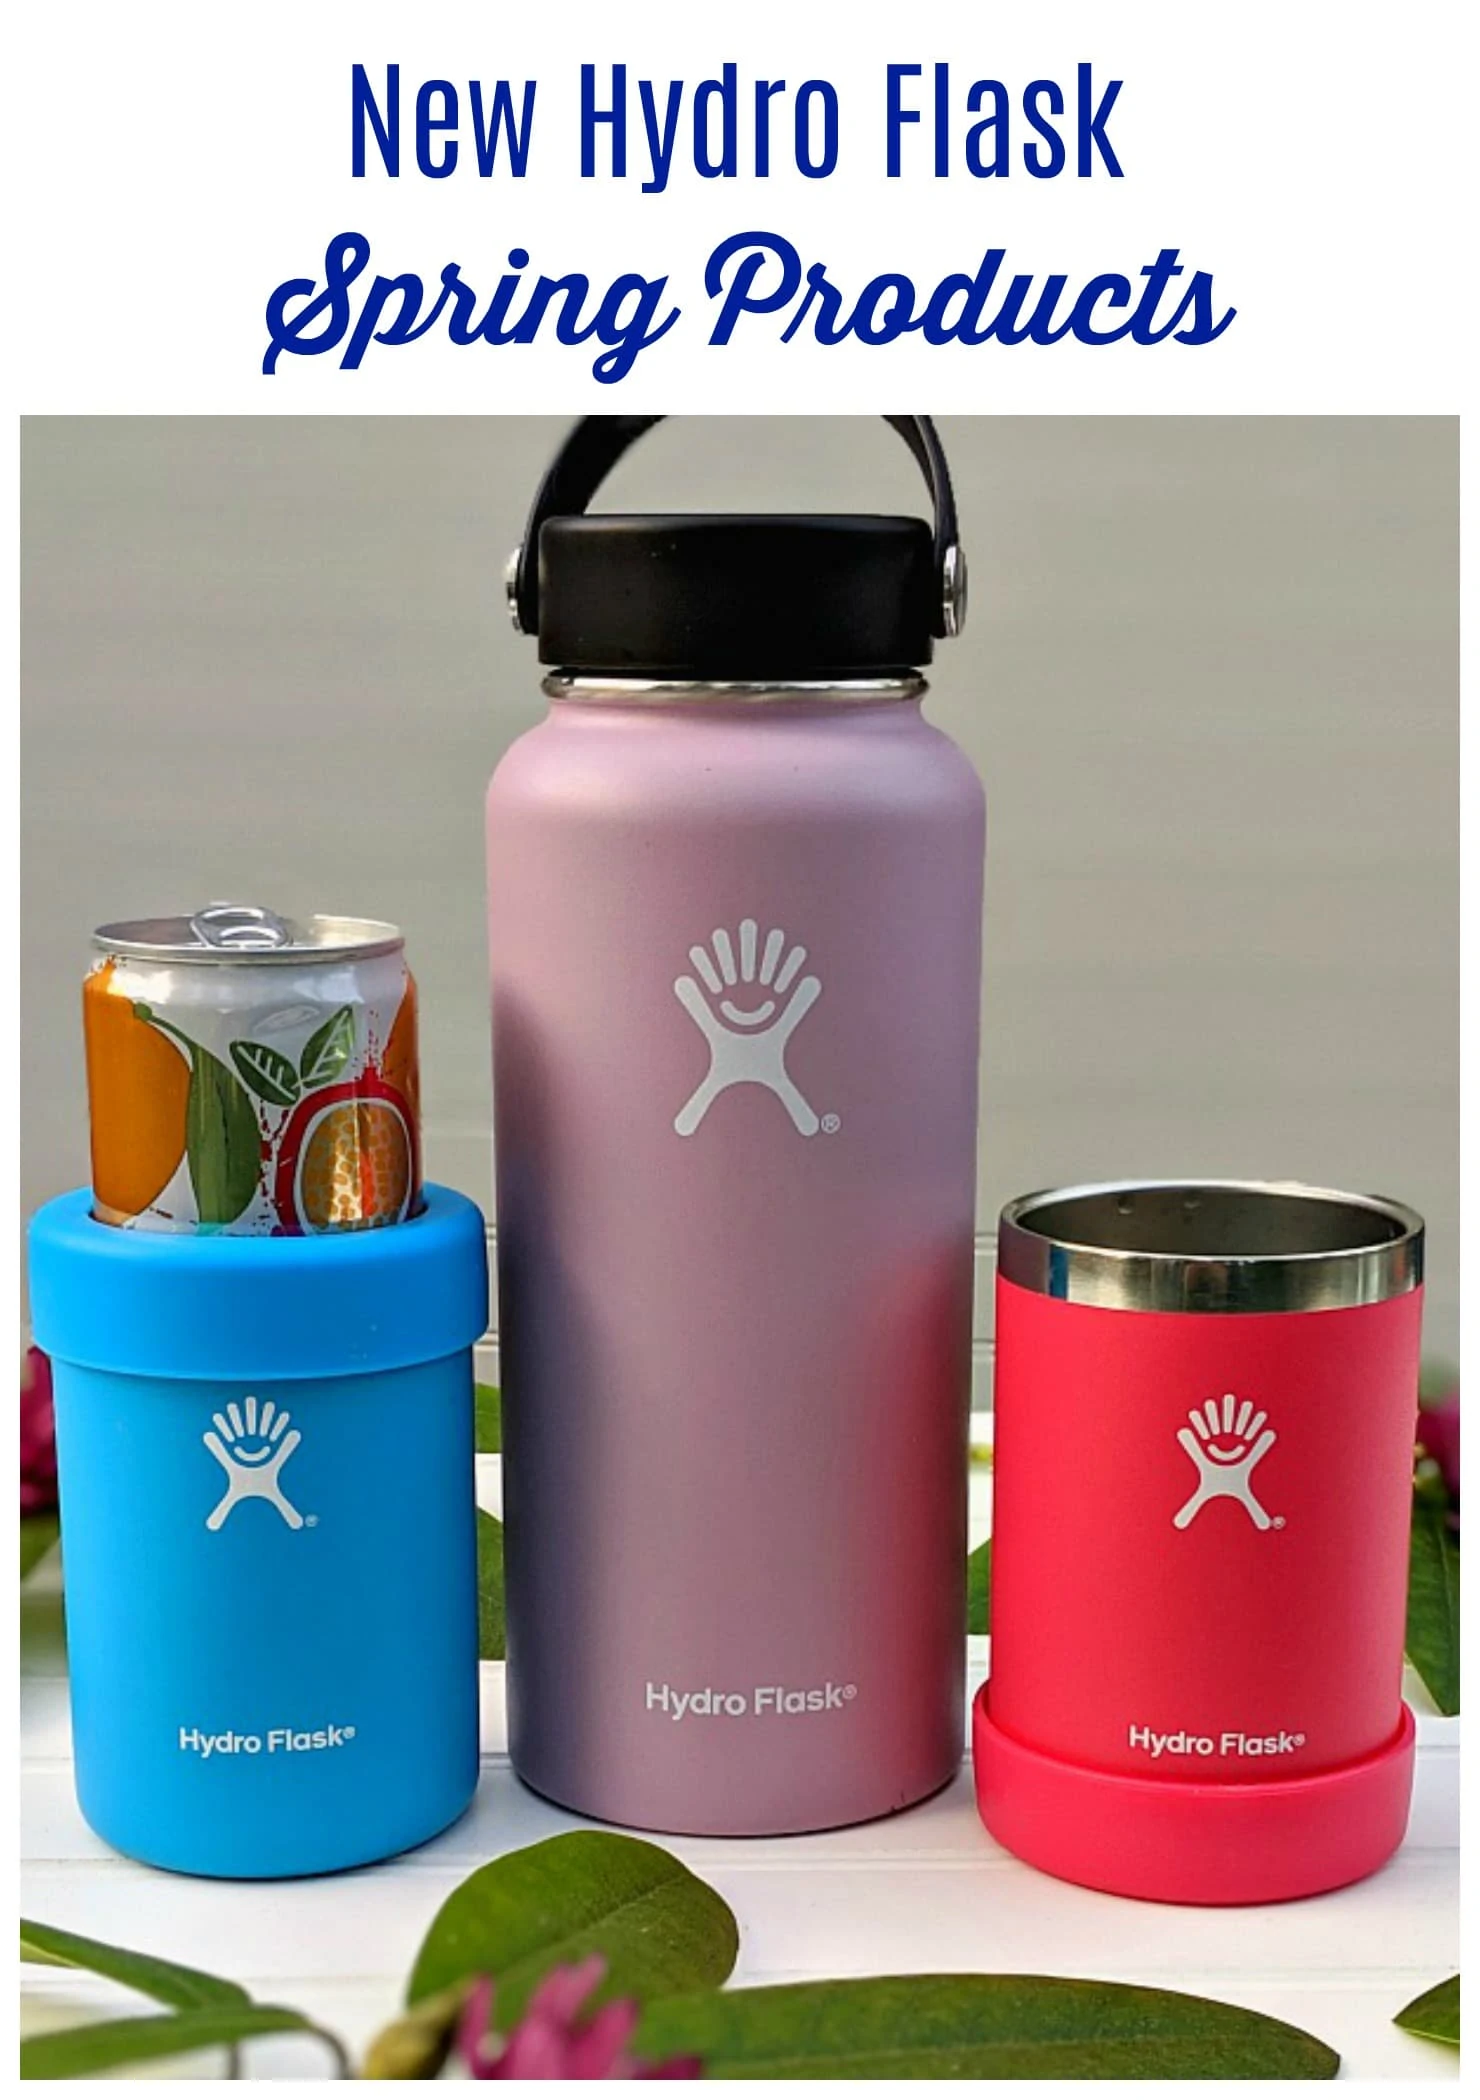 https://www.thriftynorthwestmom.com/wp-content/uploads/2019/03/Hydro-Flask-Spring-Products.webp